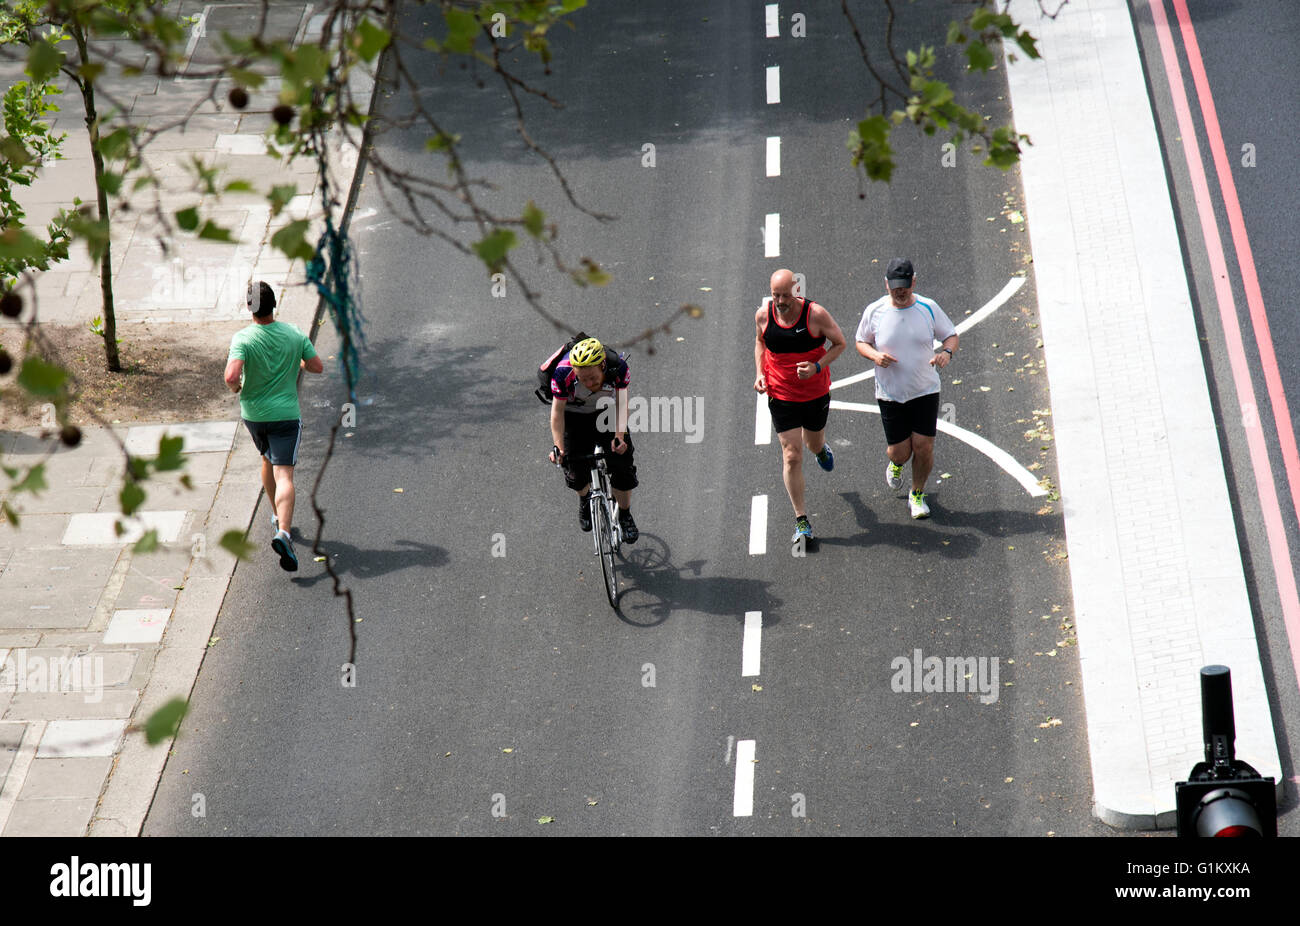 cycle superhighway Embankment joggers cyclists Stock Photo